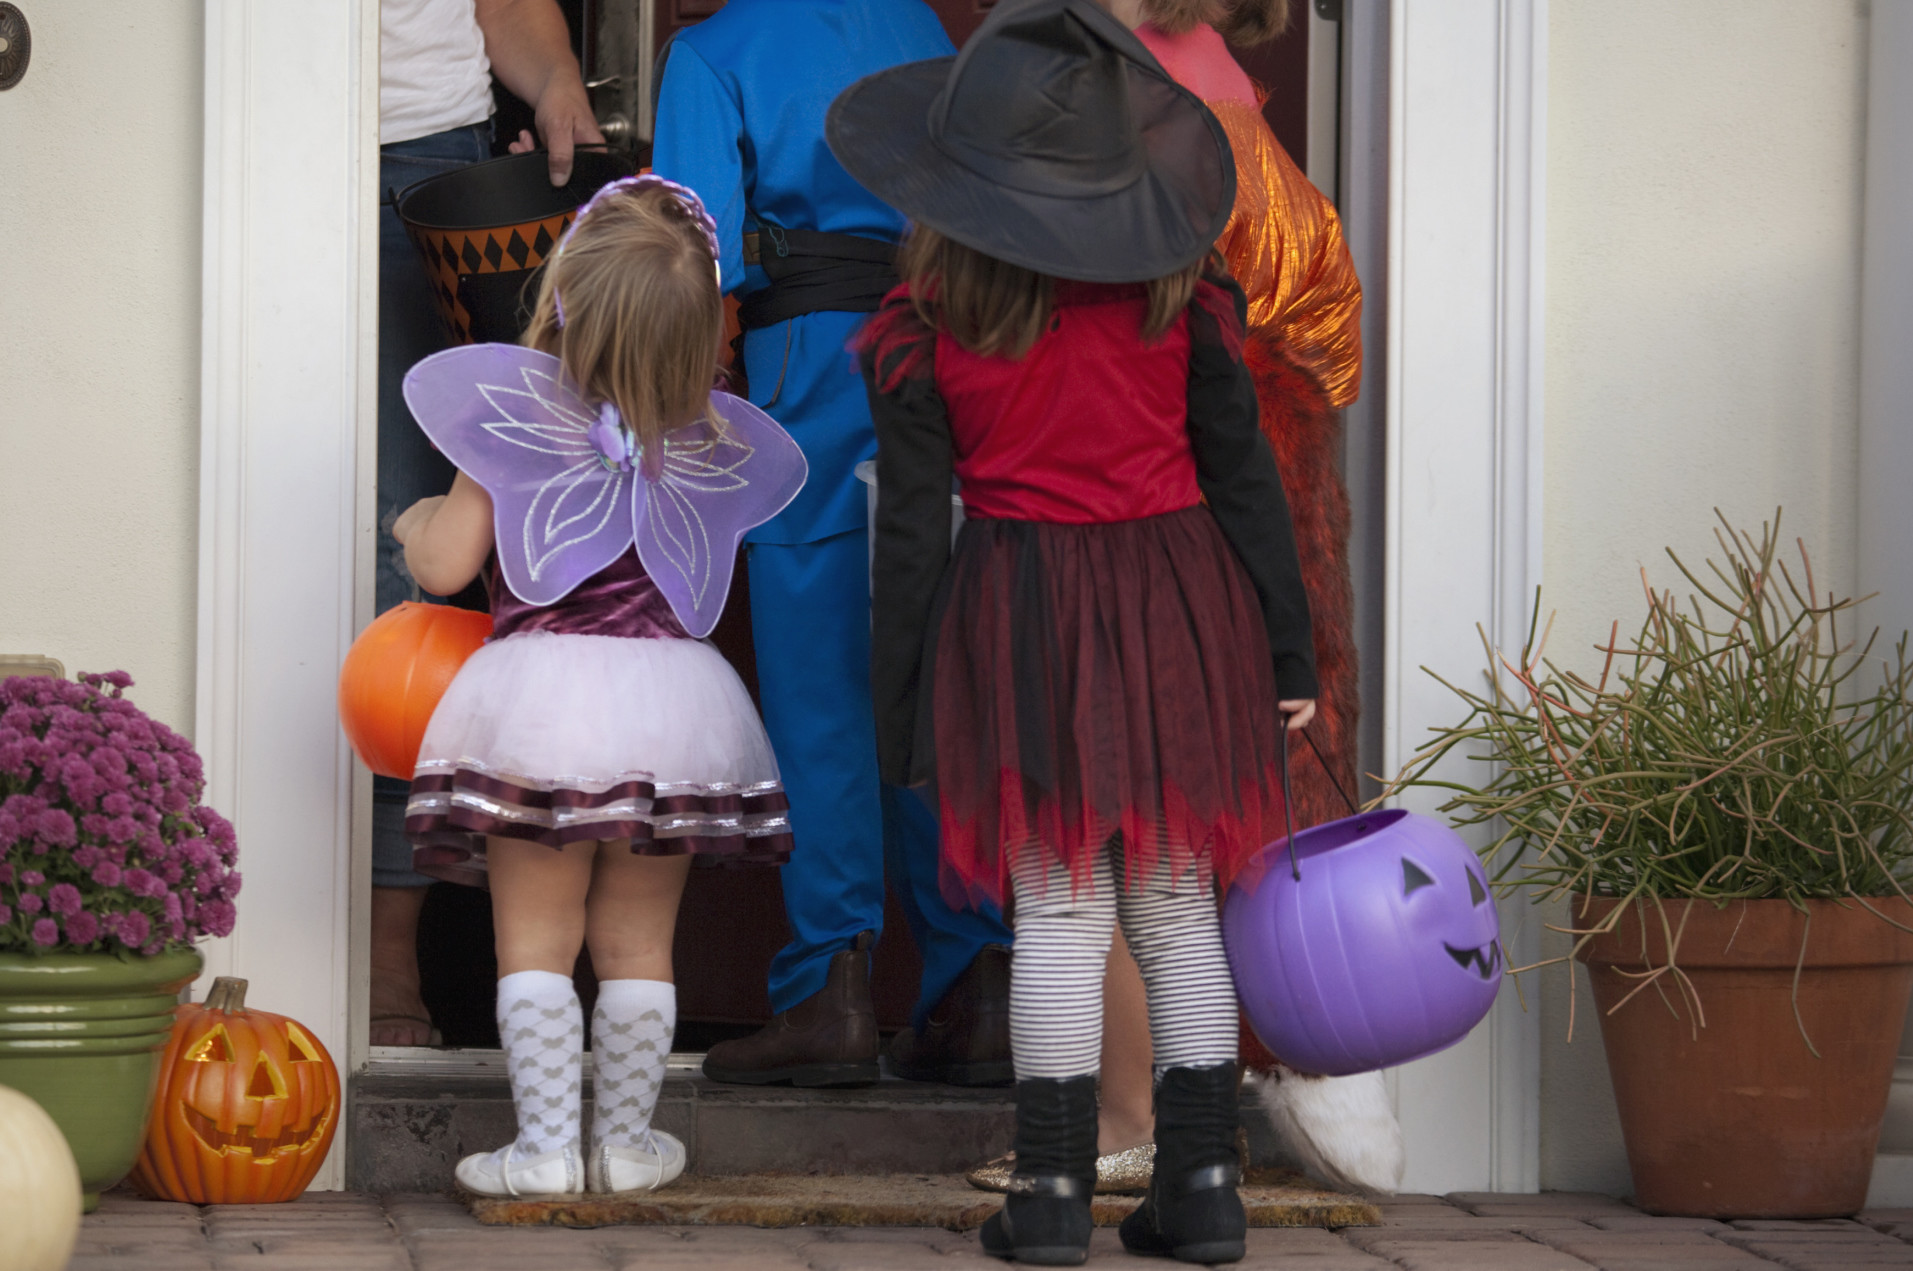 Top 10 Tips to Keep Little Ones Safe this Halloween Season